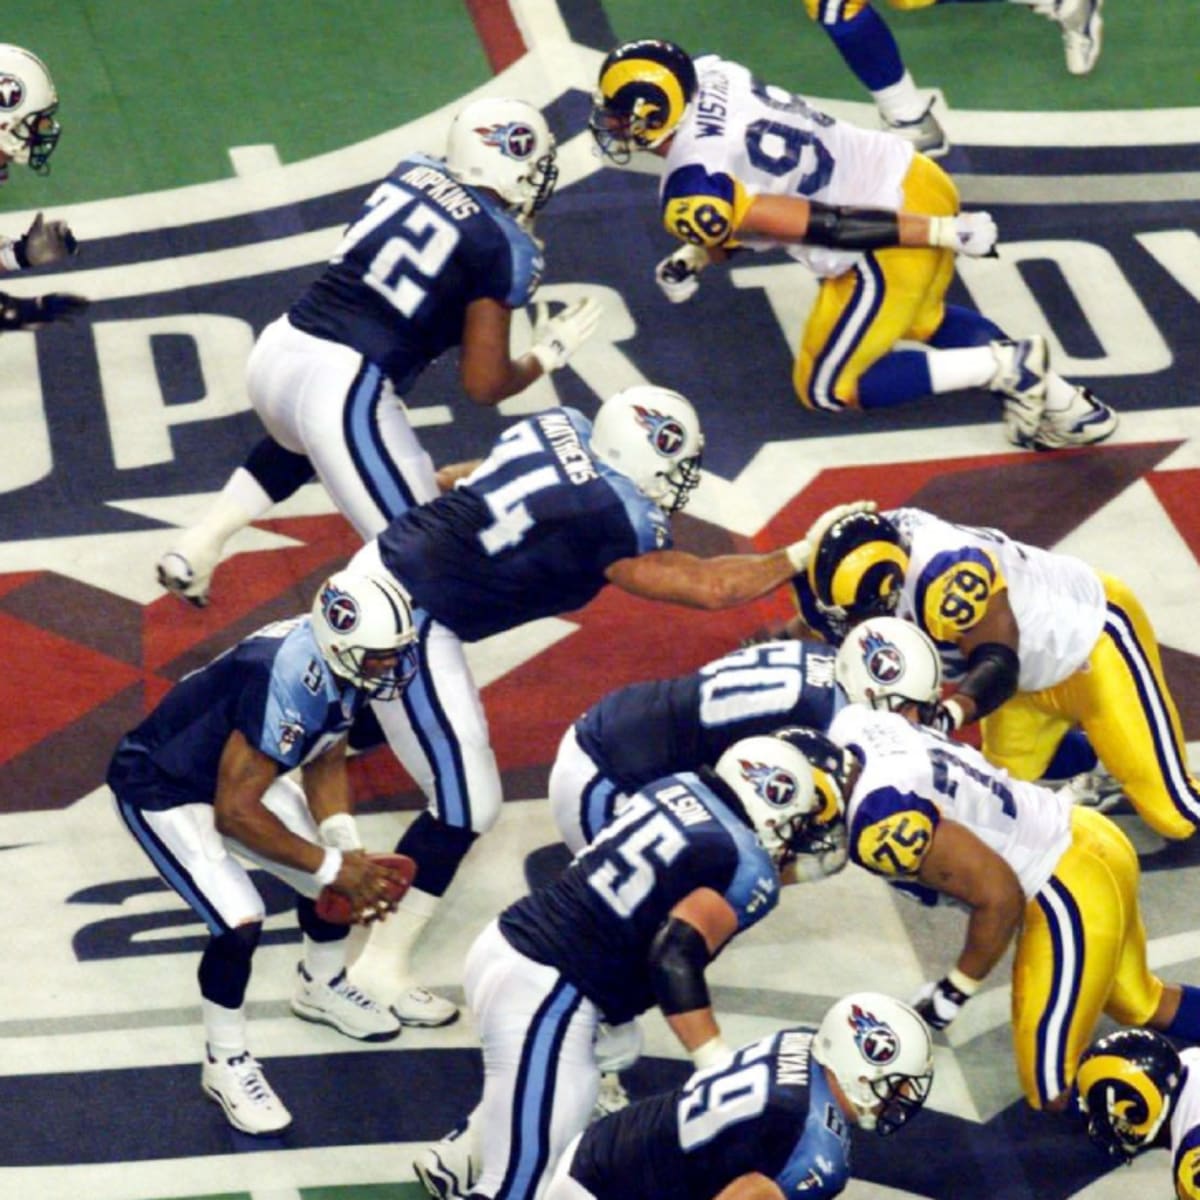 Rams Super Bowl Rings Ignore 1999 Title in St. Louis - Sports Illustrated